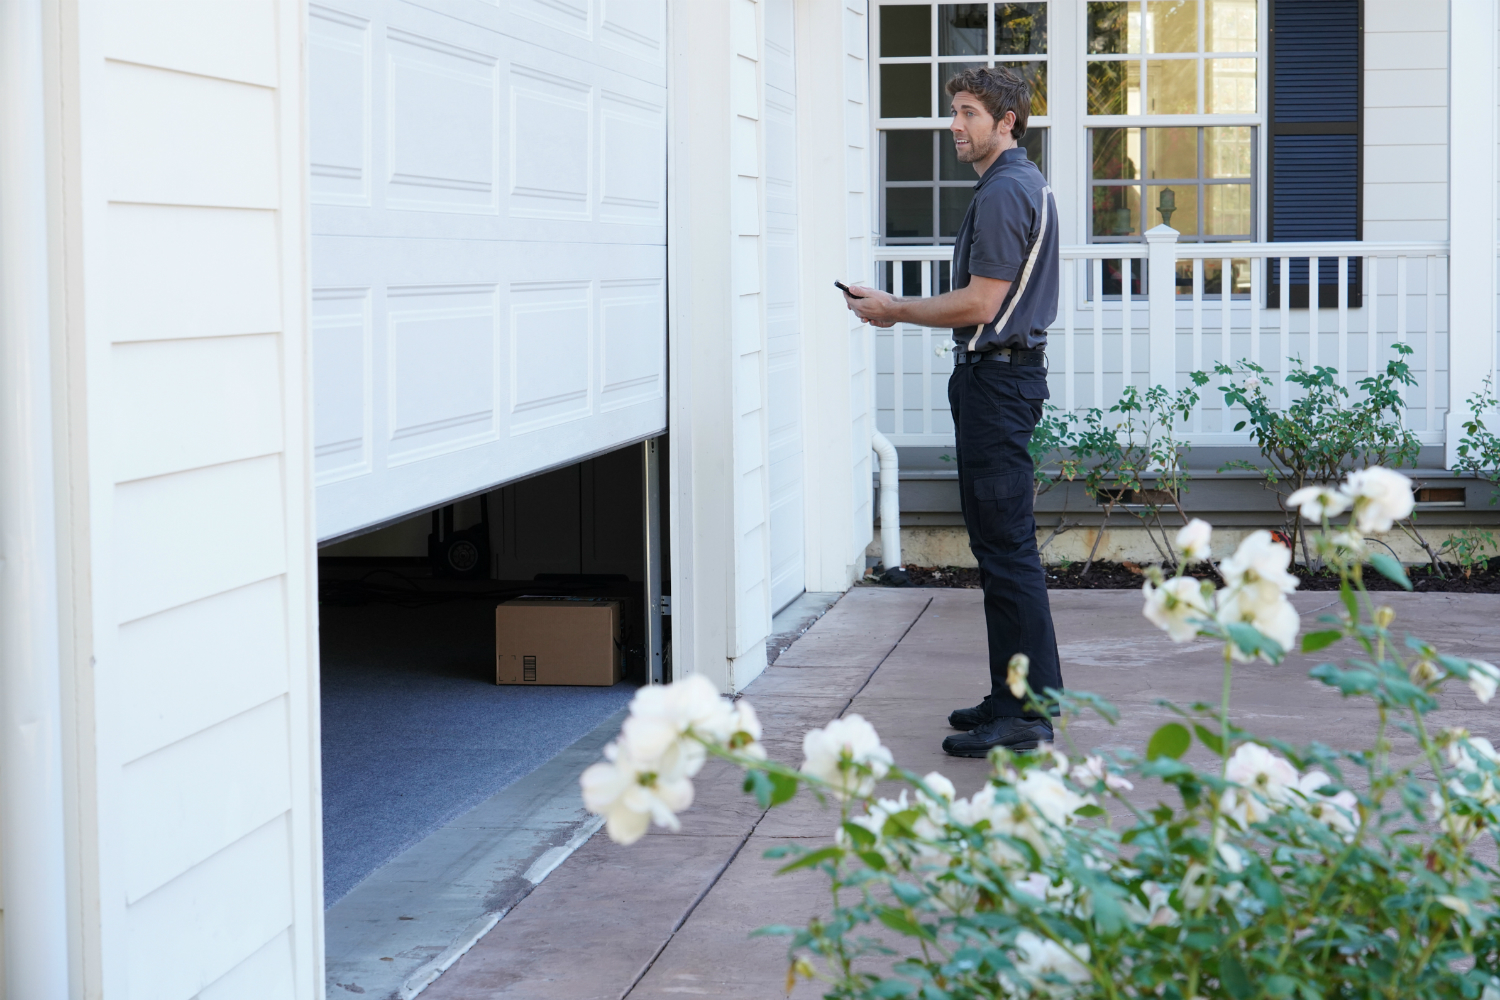 amazon key for garages apartment buildings ring devices garage delivery